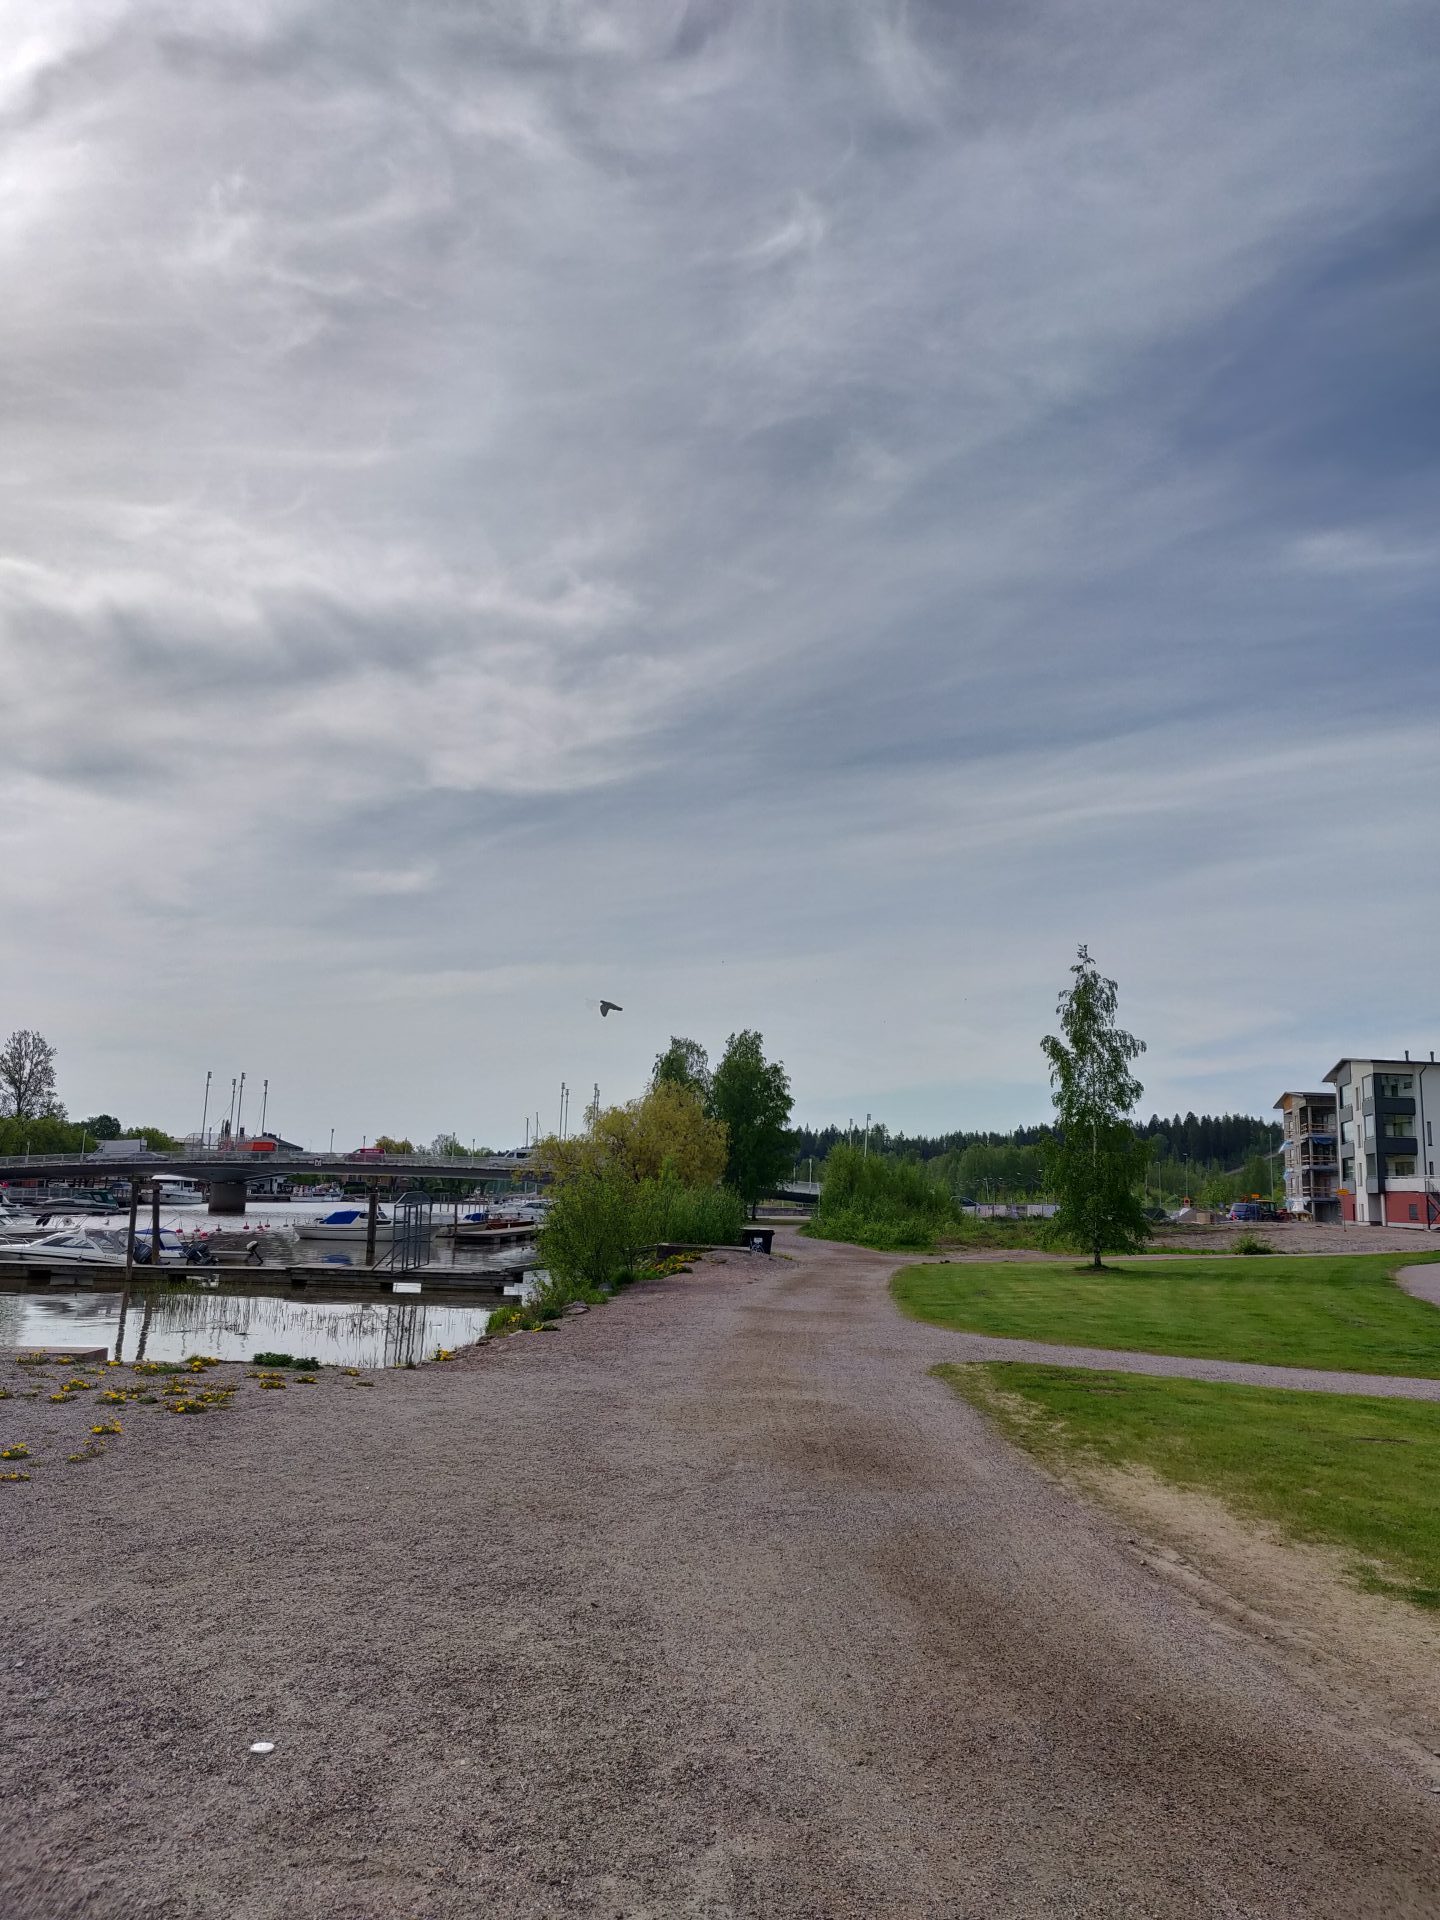 Impressions from the pedestrian route along Porvoonjoki river in Porvoo